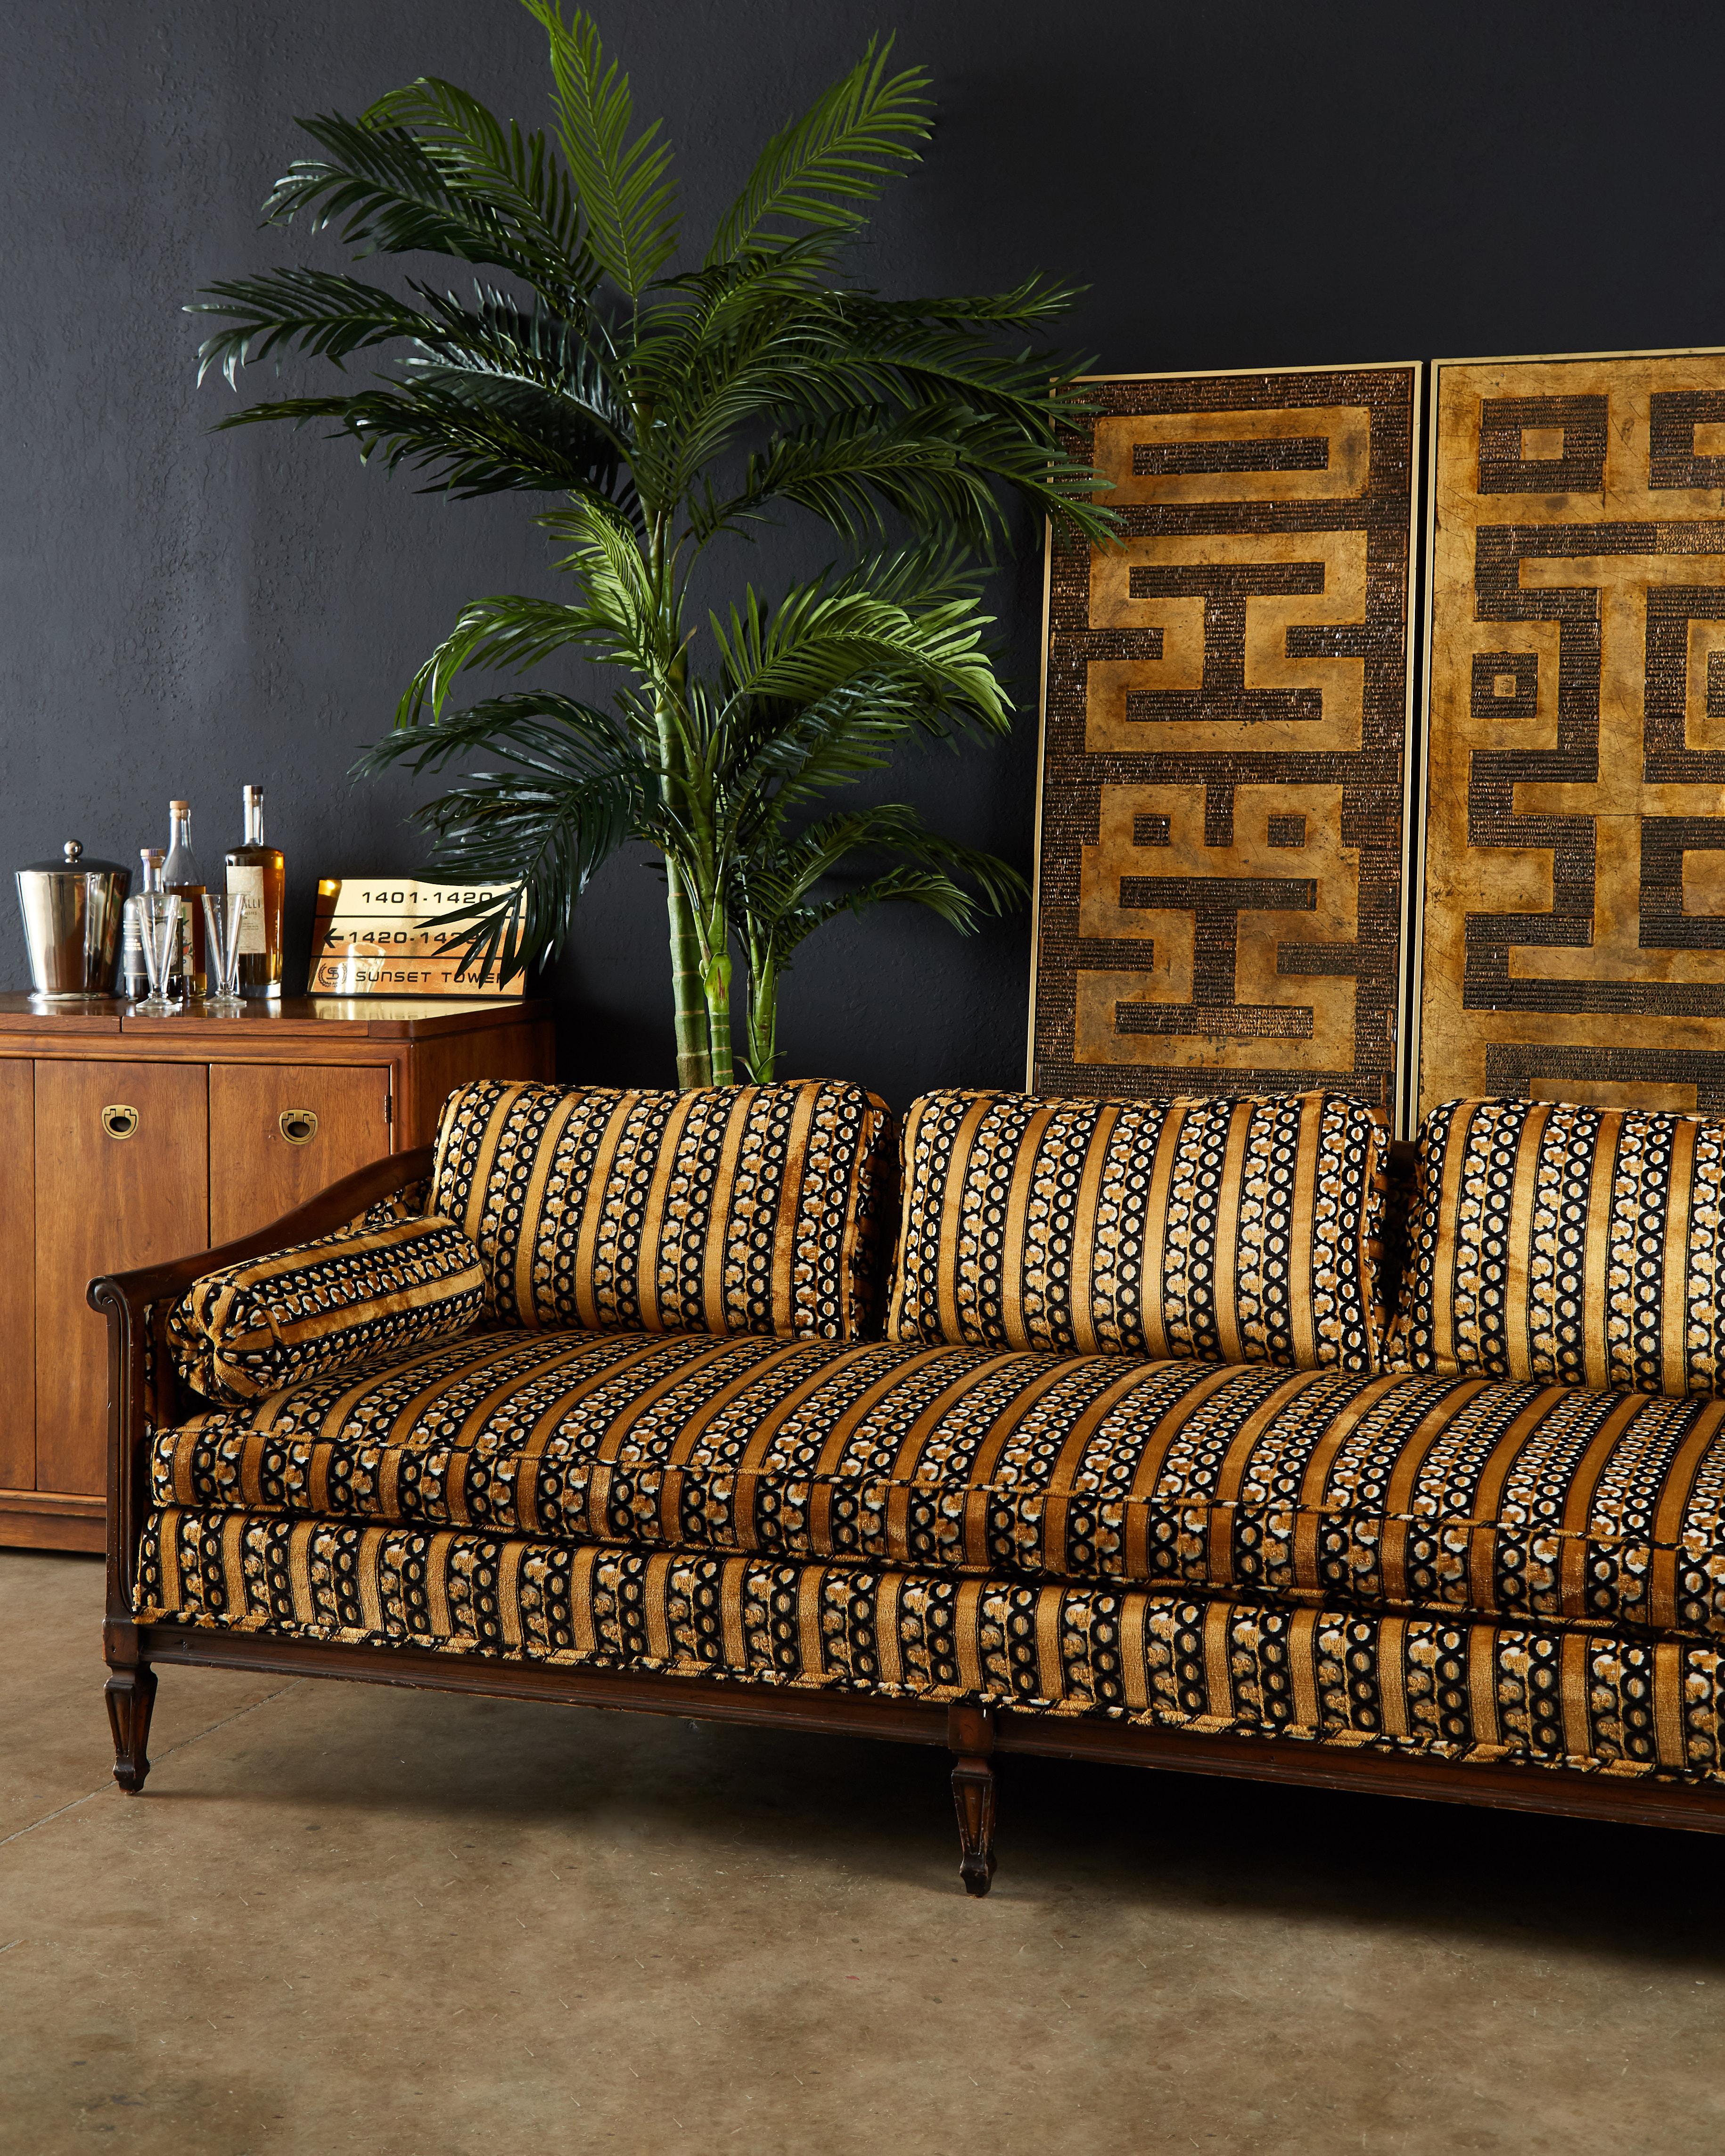 Chic midcentury walnut three-seat sofa featuring a Versace-esque upholstery by Dunbar. The walnut frame was constructed with a low profile case design having graceful sloping arms and back. The walnut has a beautiful lightly distressed finish and